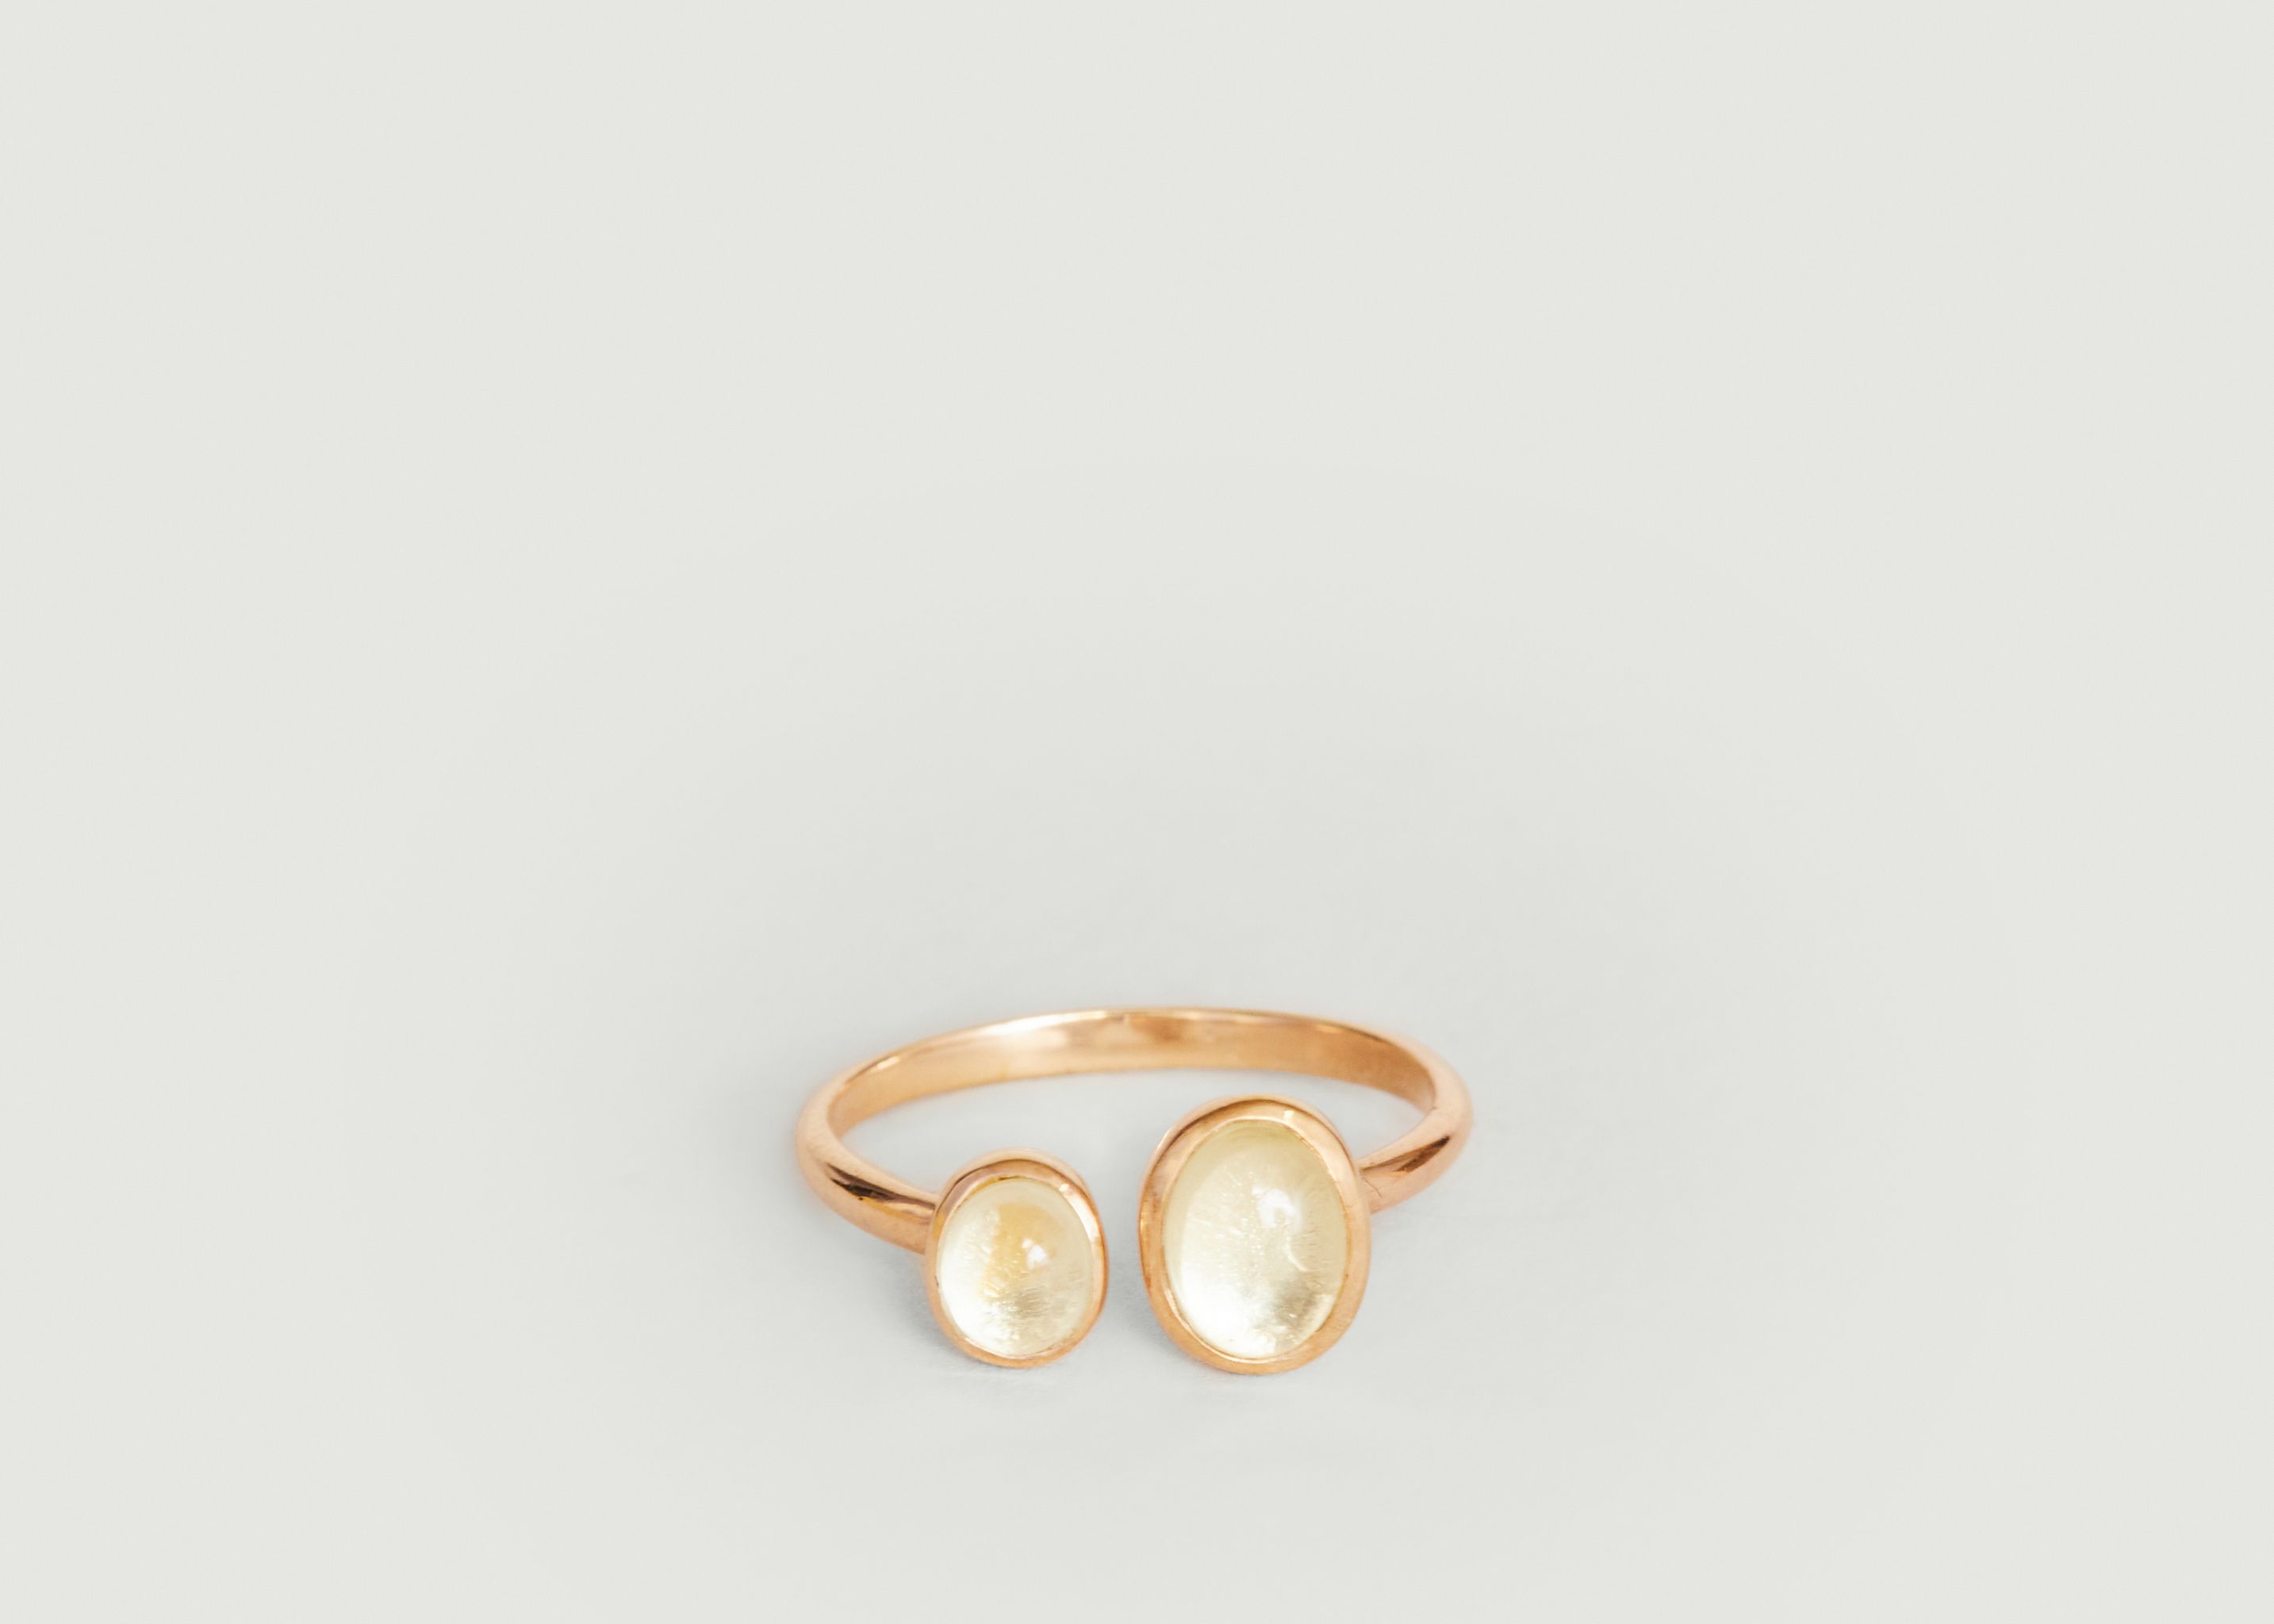 Duo Citron ring with quartz - Gamme Blanche